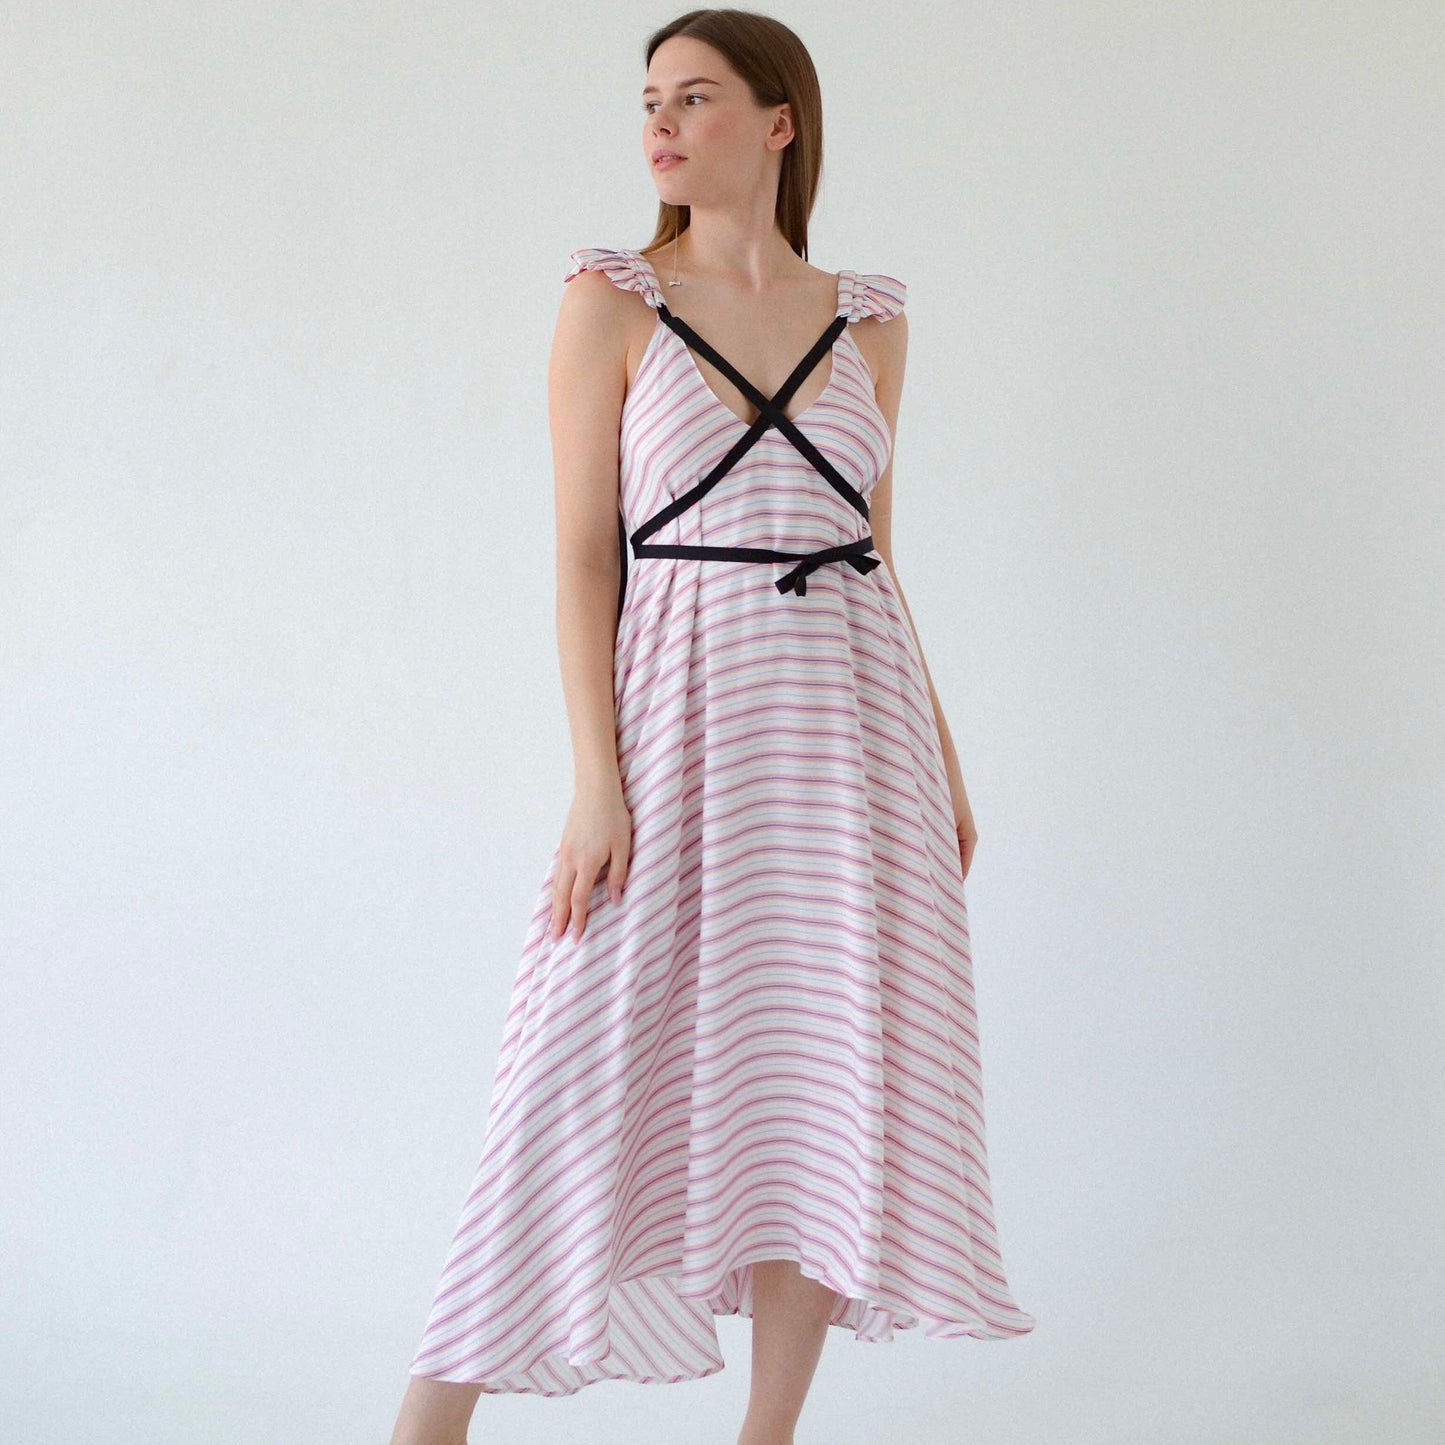 Dress with striped ribbons